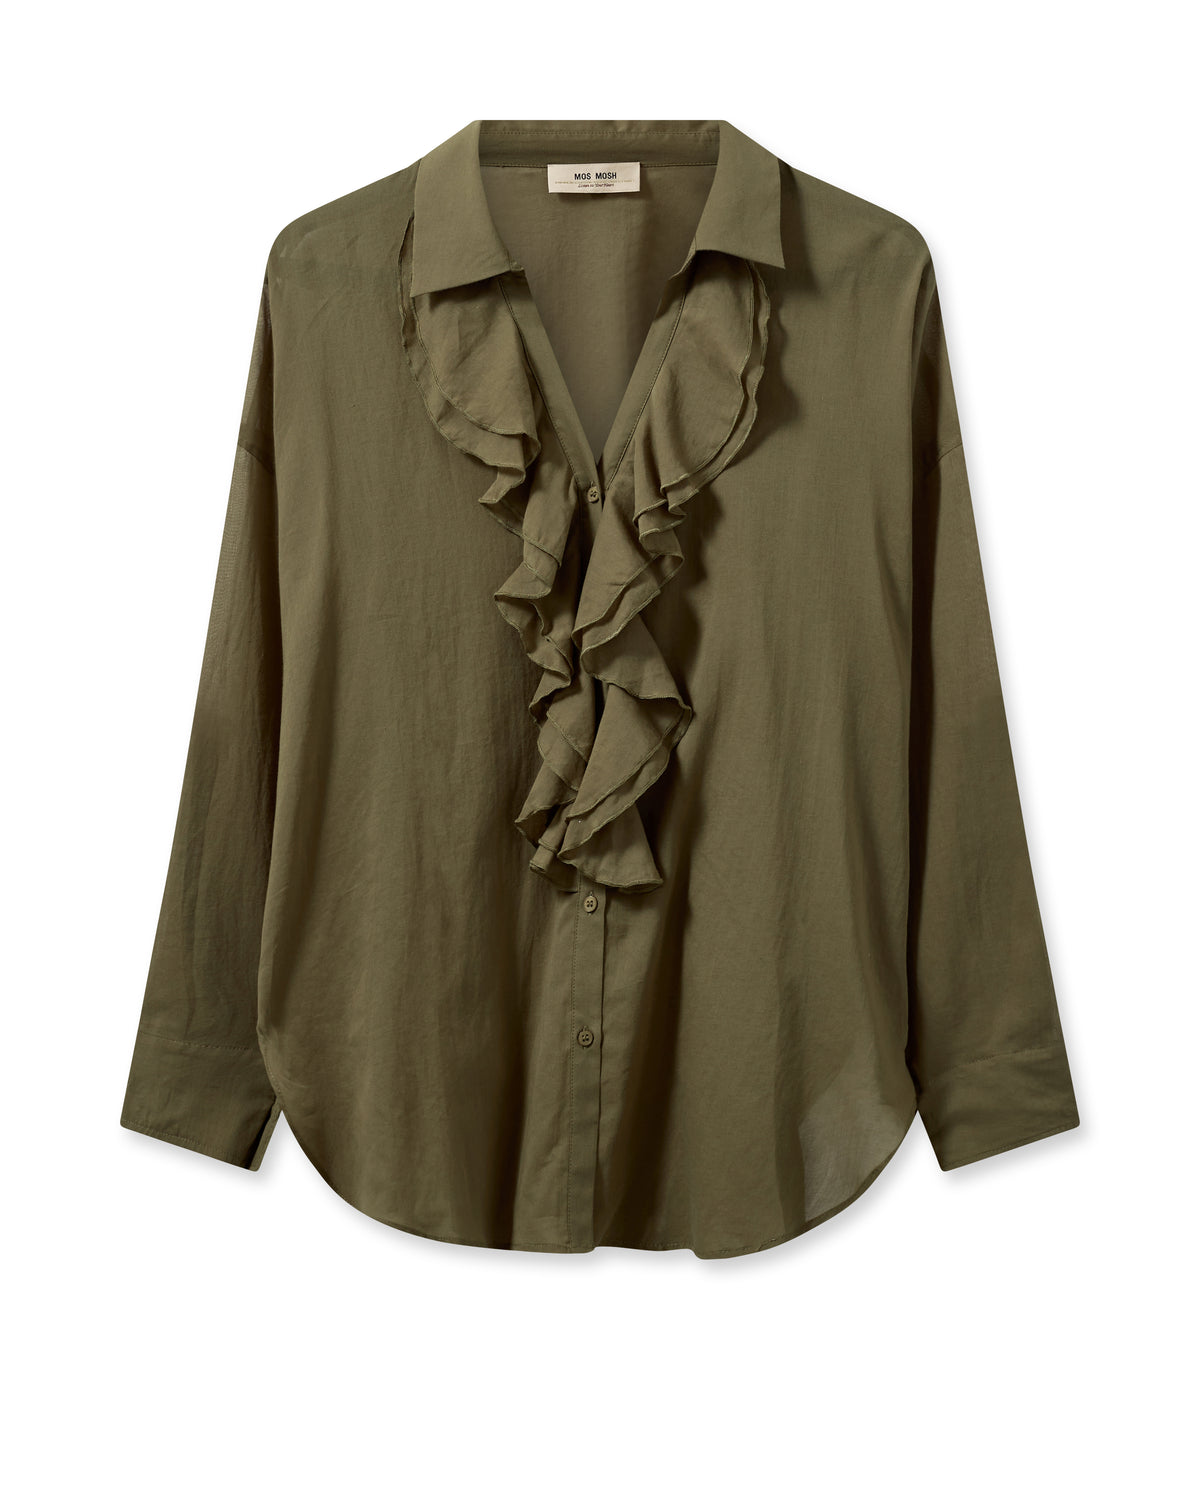 Khaki cotton shirt with long sleeves and ruffle detail